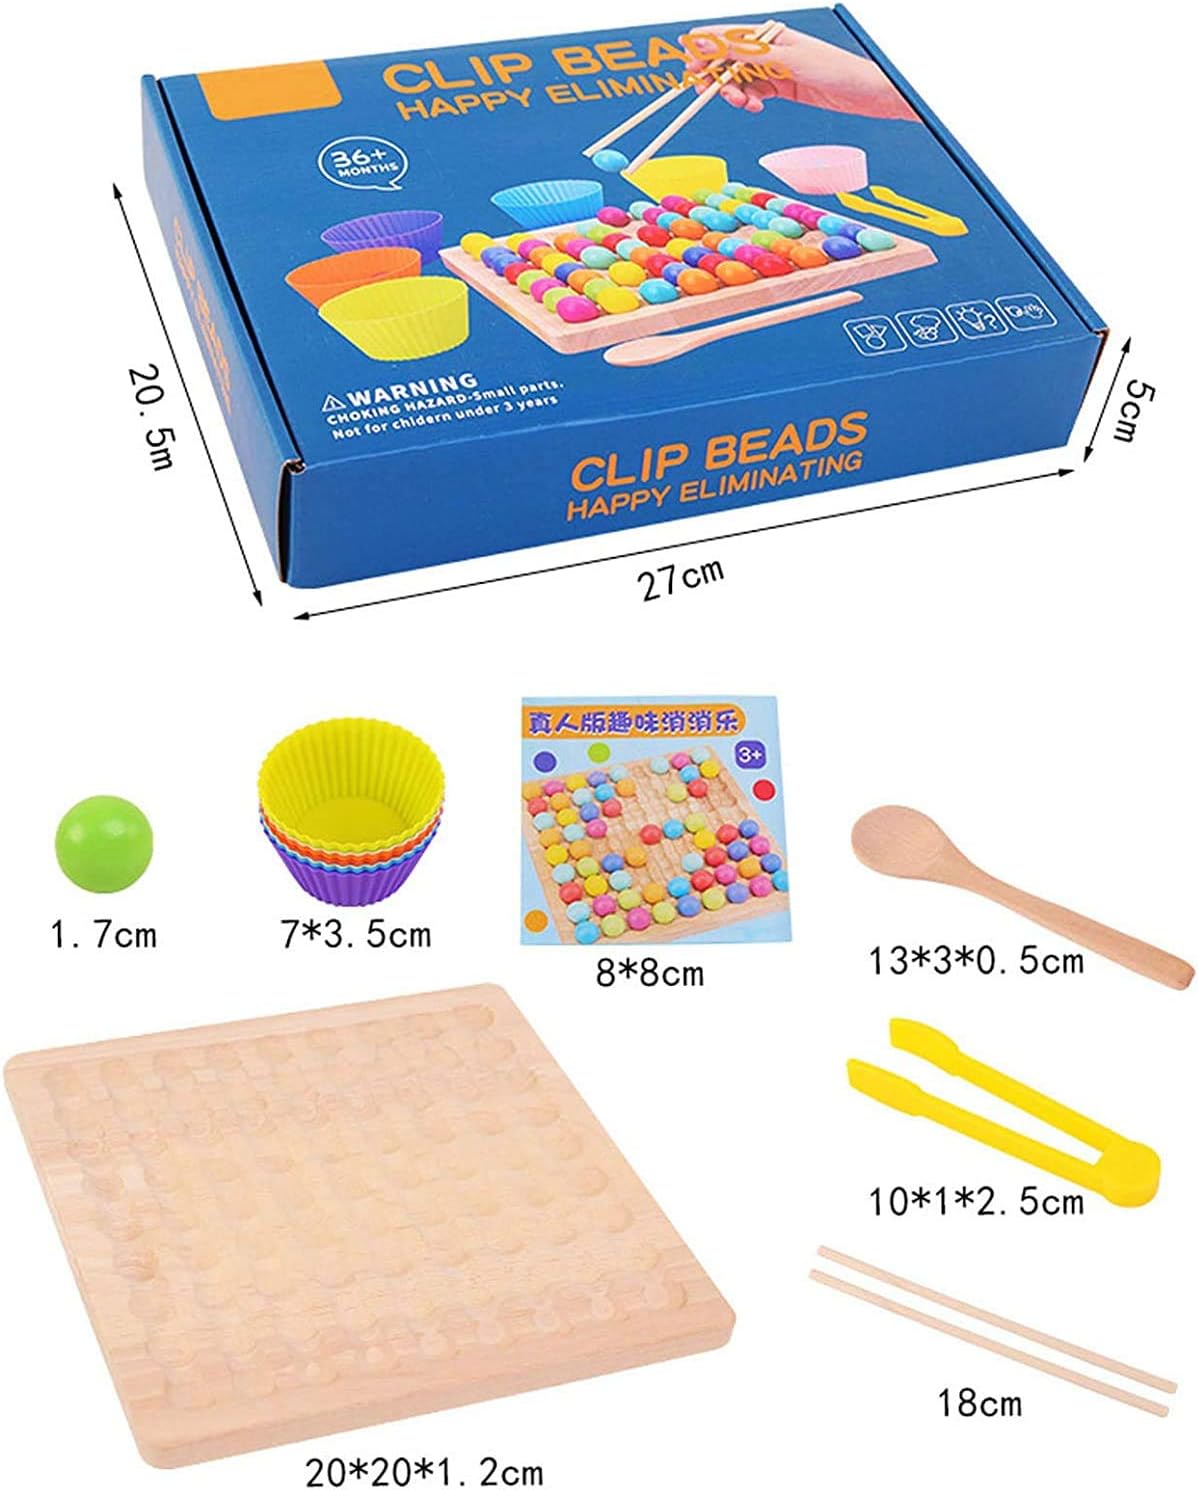 Wooden Board Bead Game Toy,Wooden Go Games Set Dots Shuttle Beads Board Games Rainbow Clip Beads Puzzle of Wooden Clip Beads Rainbow Toy Early Education Puzzle Board Game